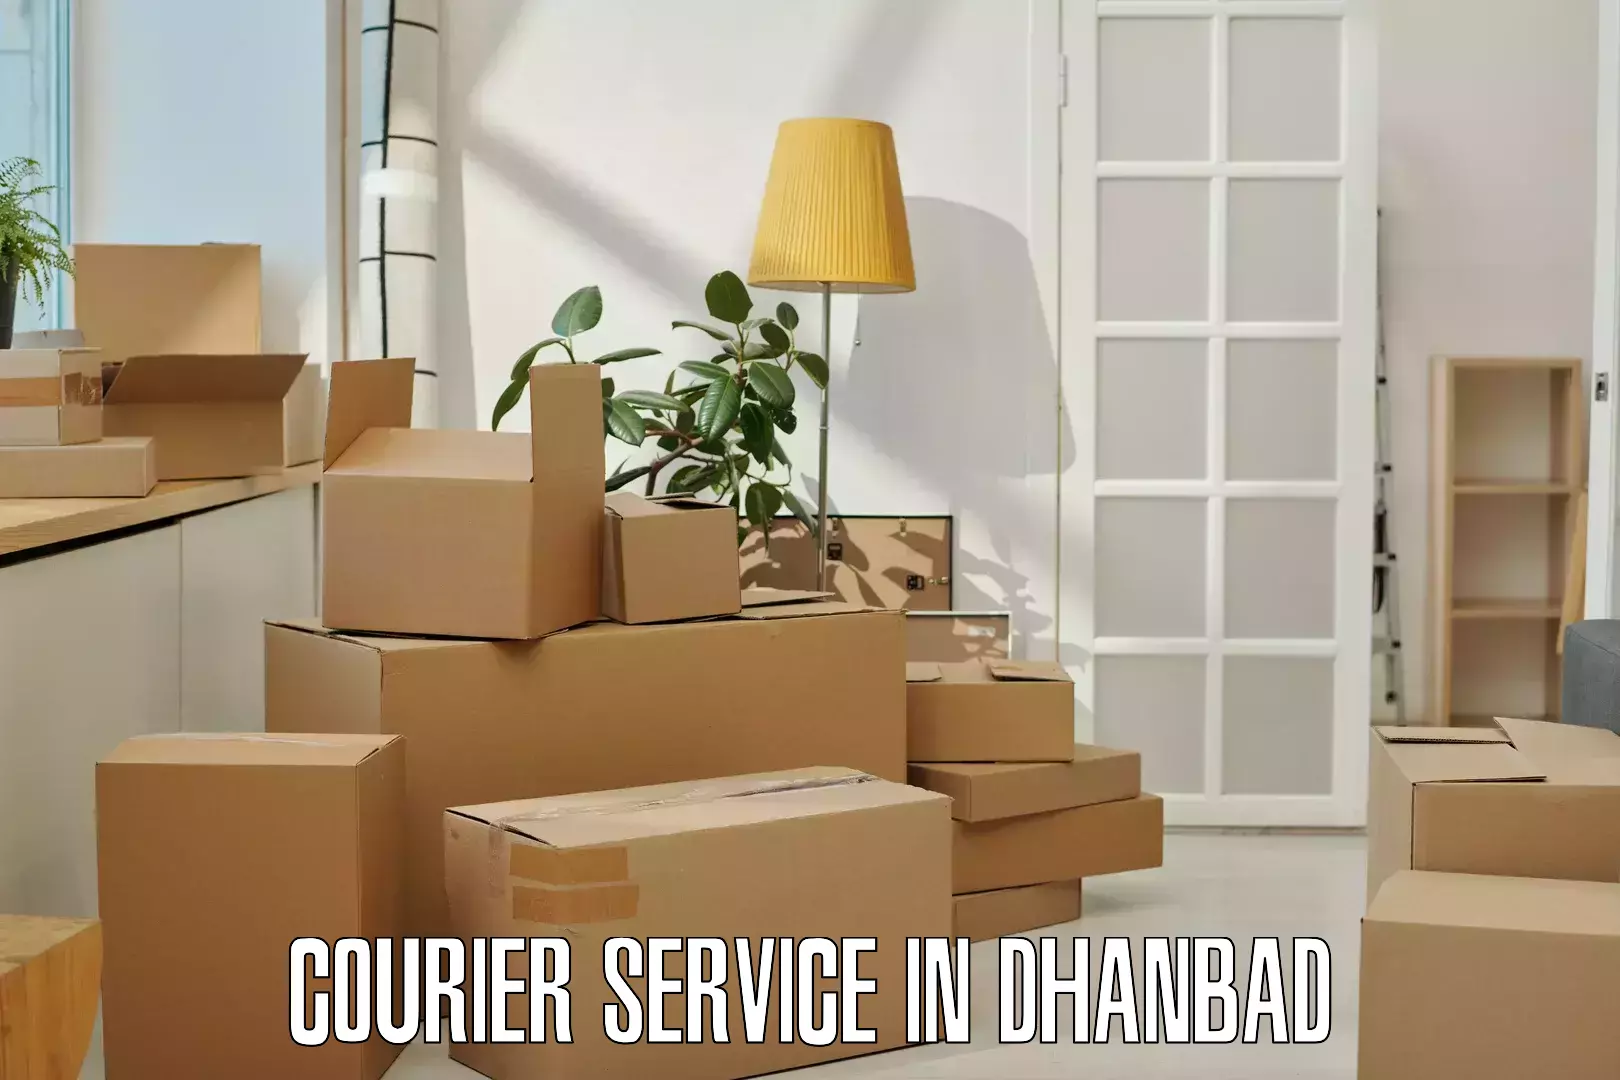 Expedited shipping methods in Dhanbad